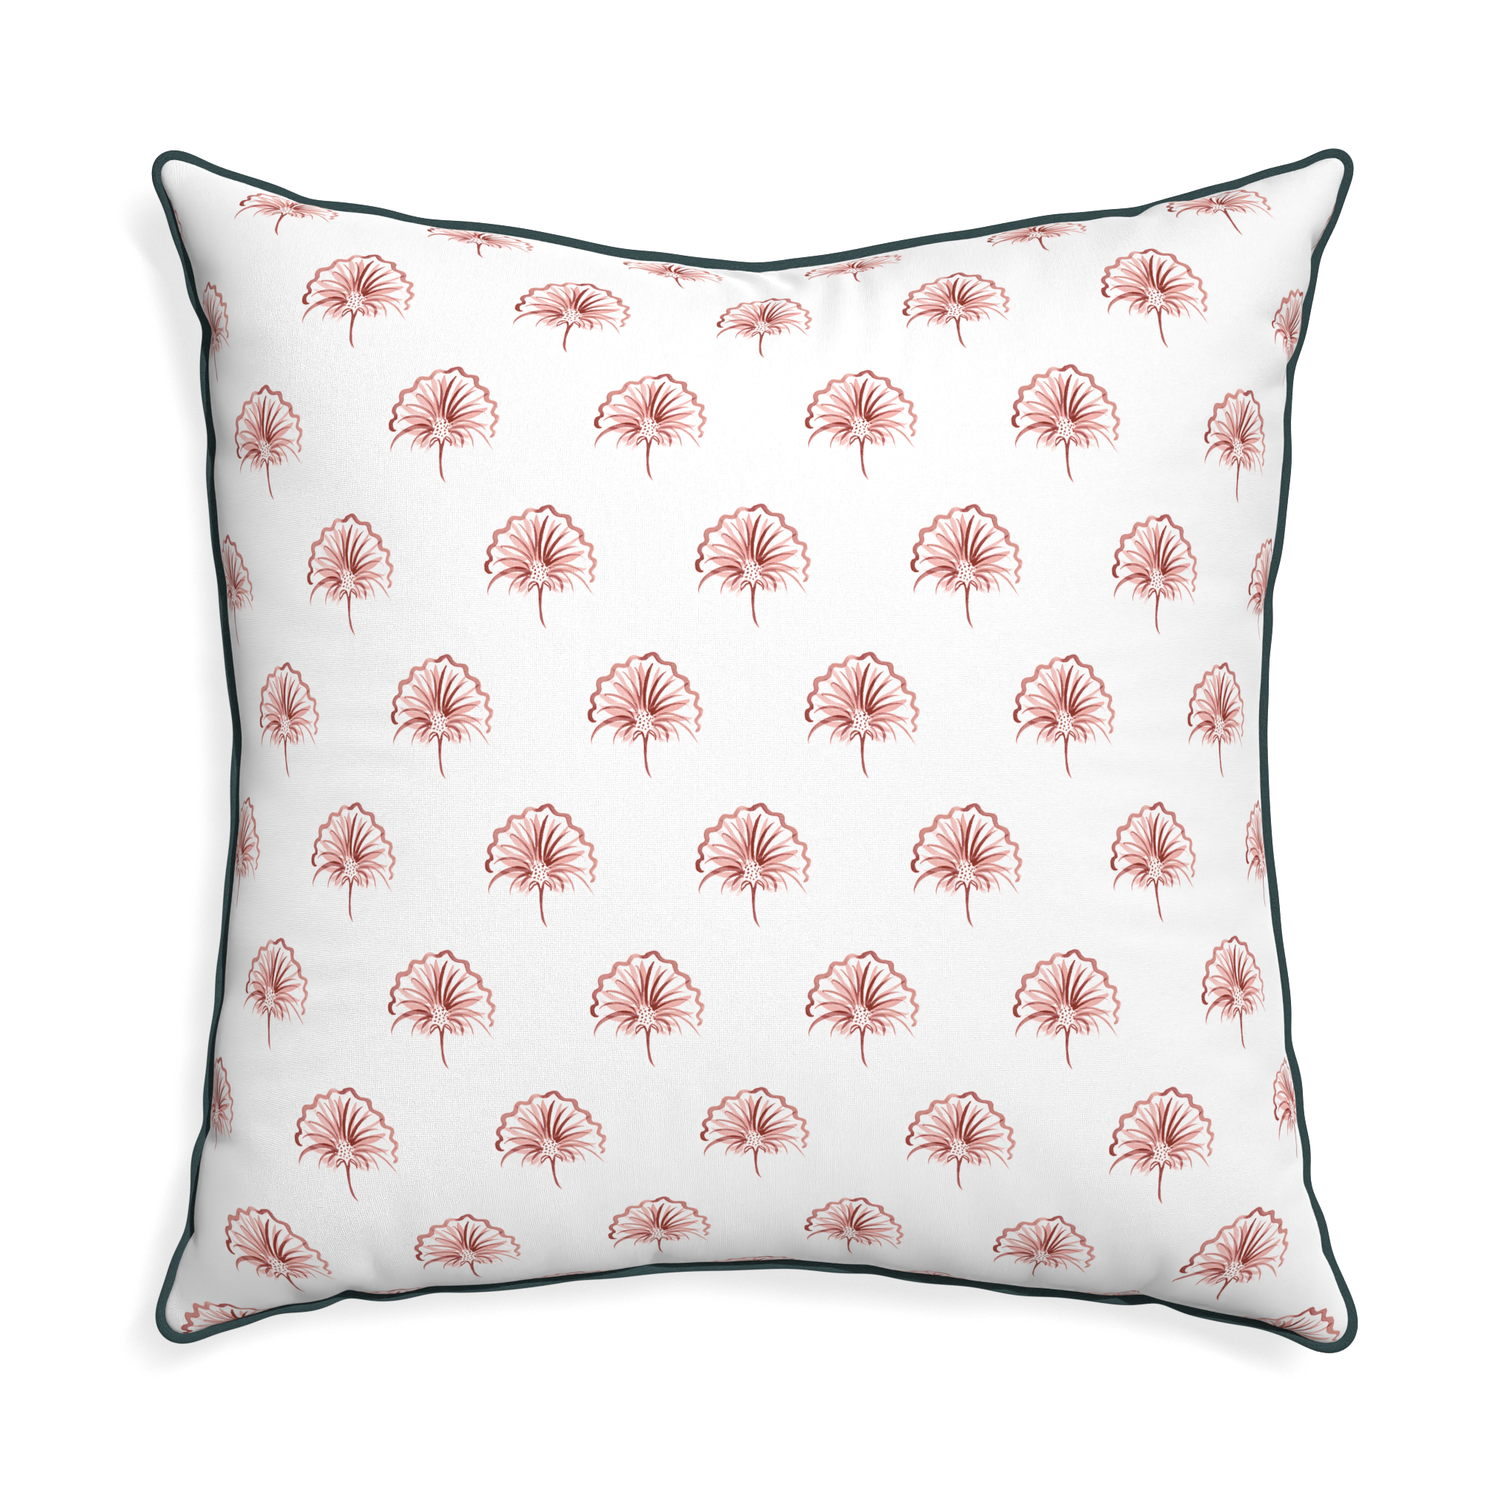 Euro-sham penelope rose custom floral pinkpillow with p piping on white background